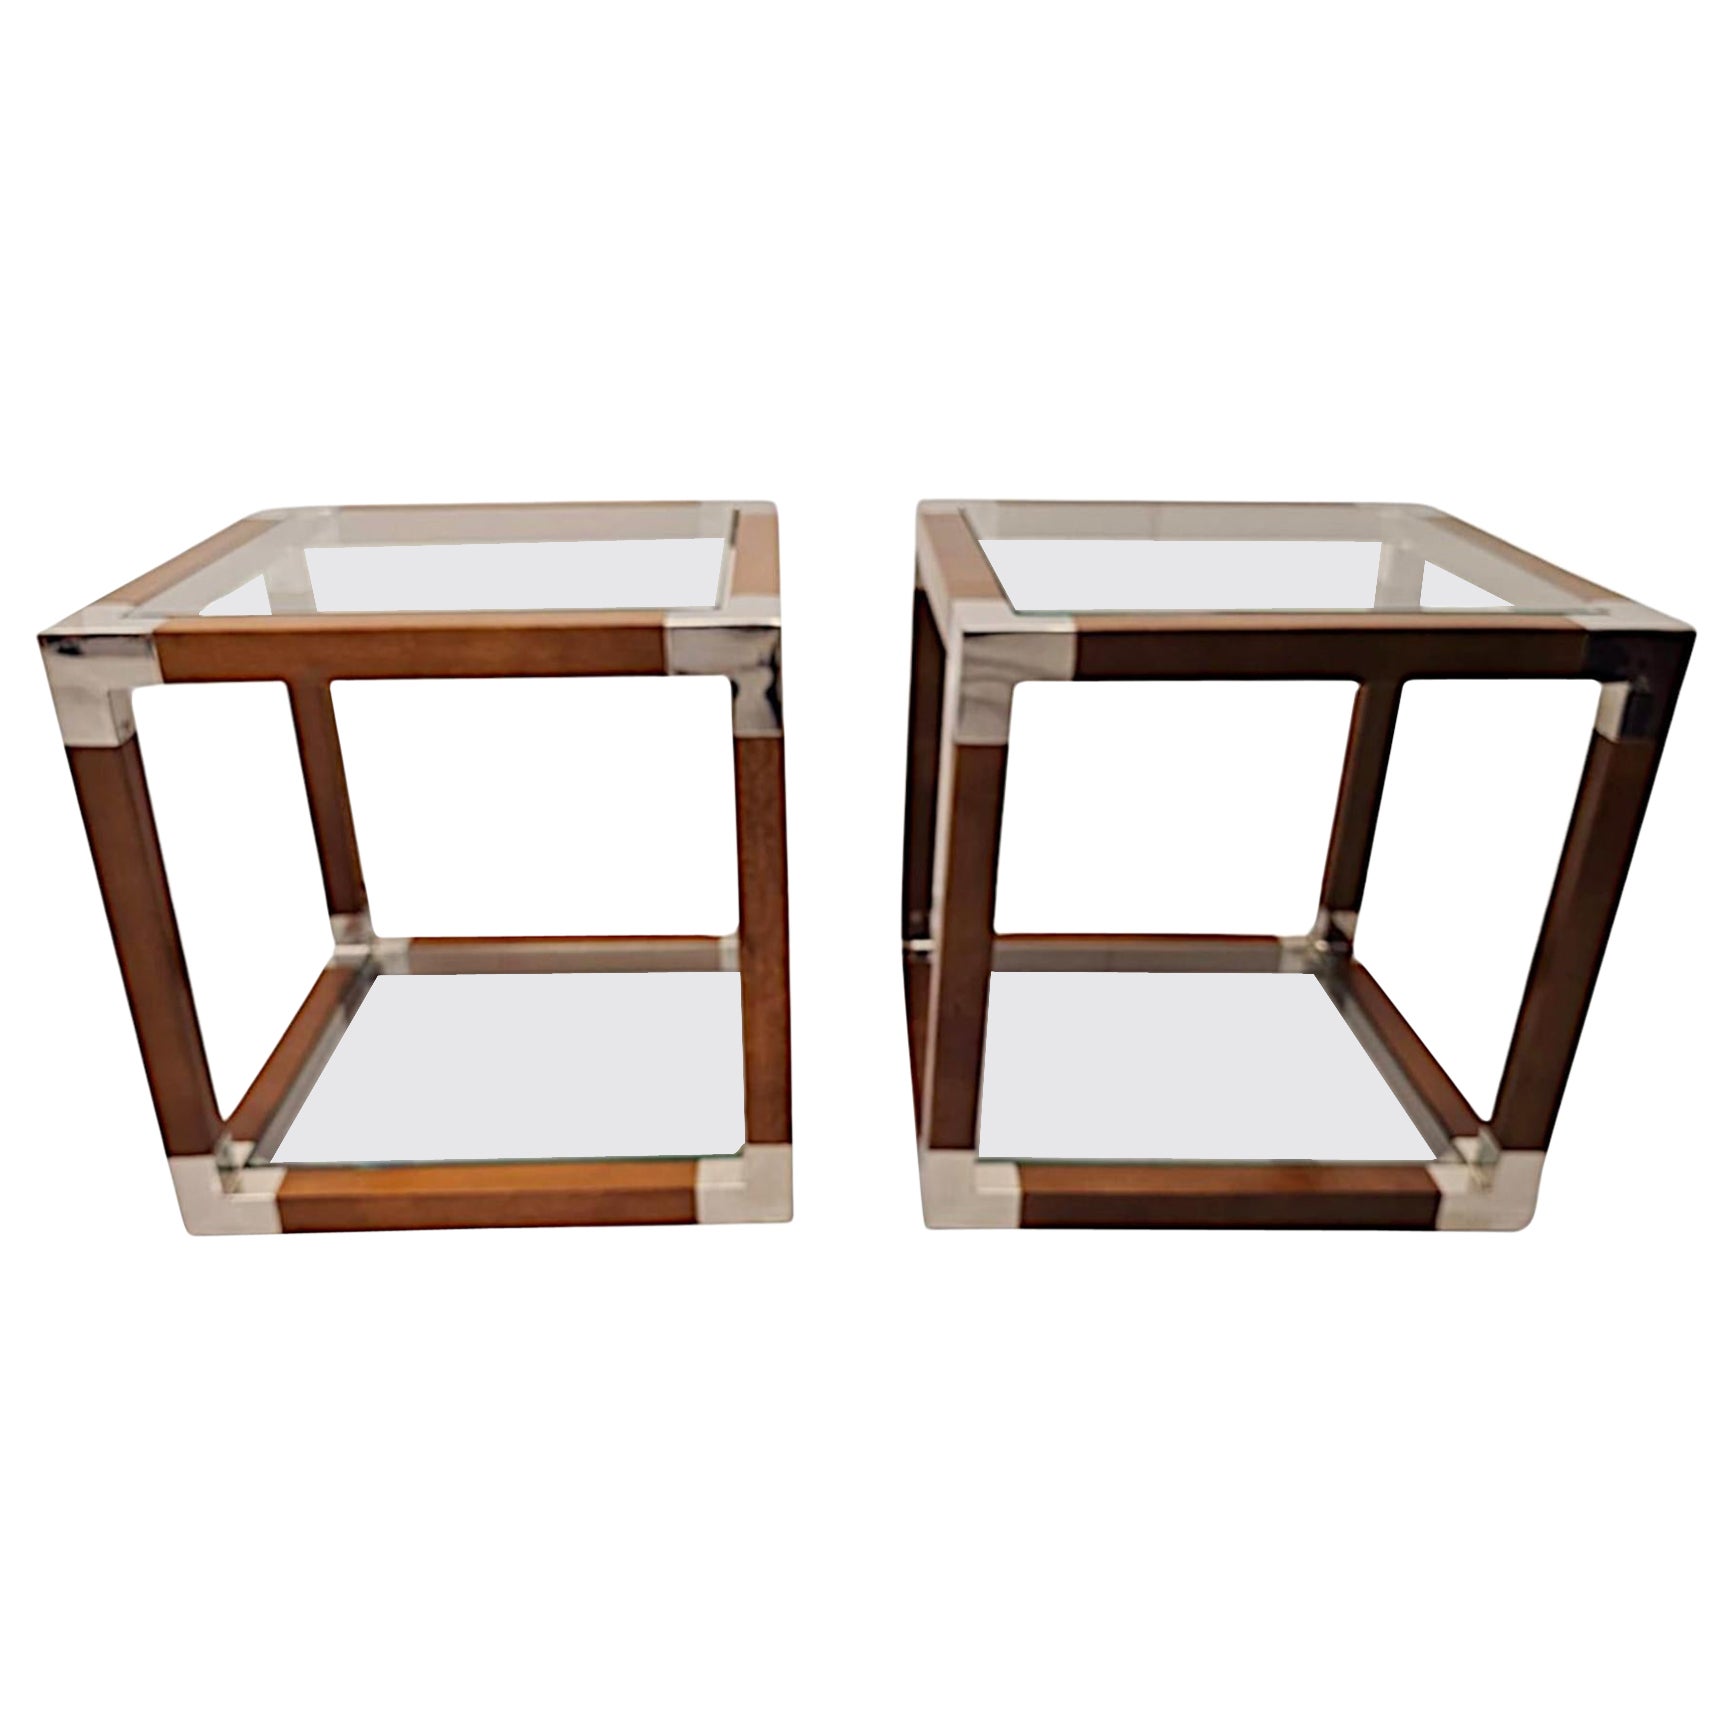 A Gorgeous Pair of Cherrywood and Glass Side Tables For Sale